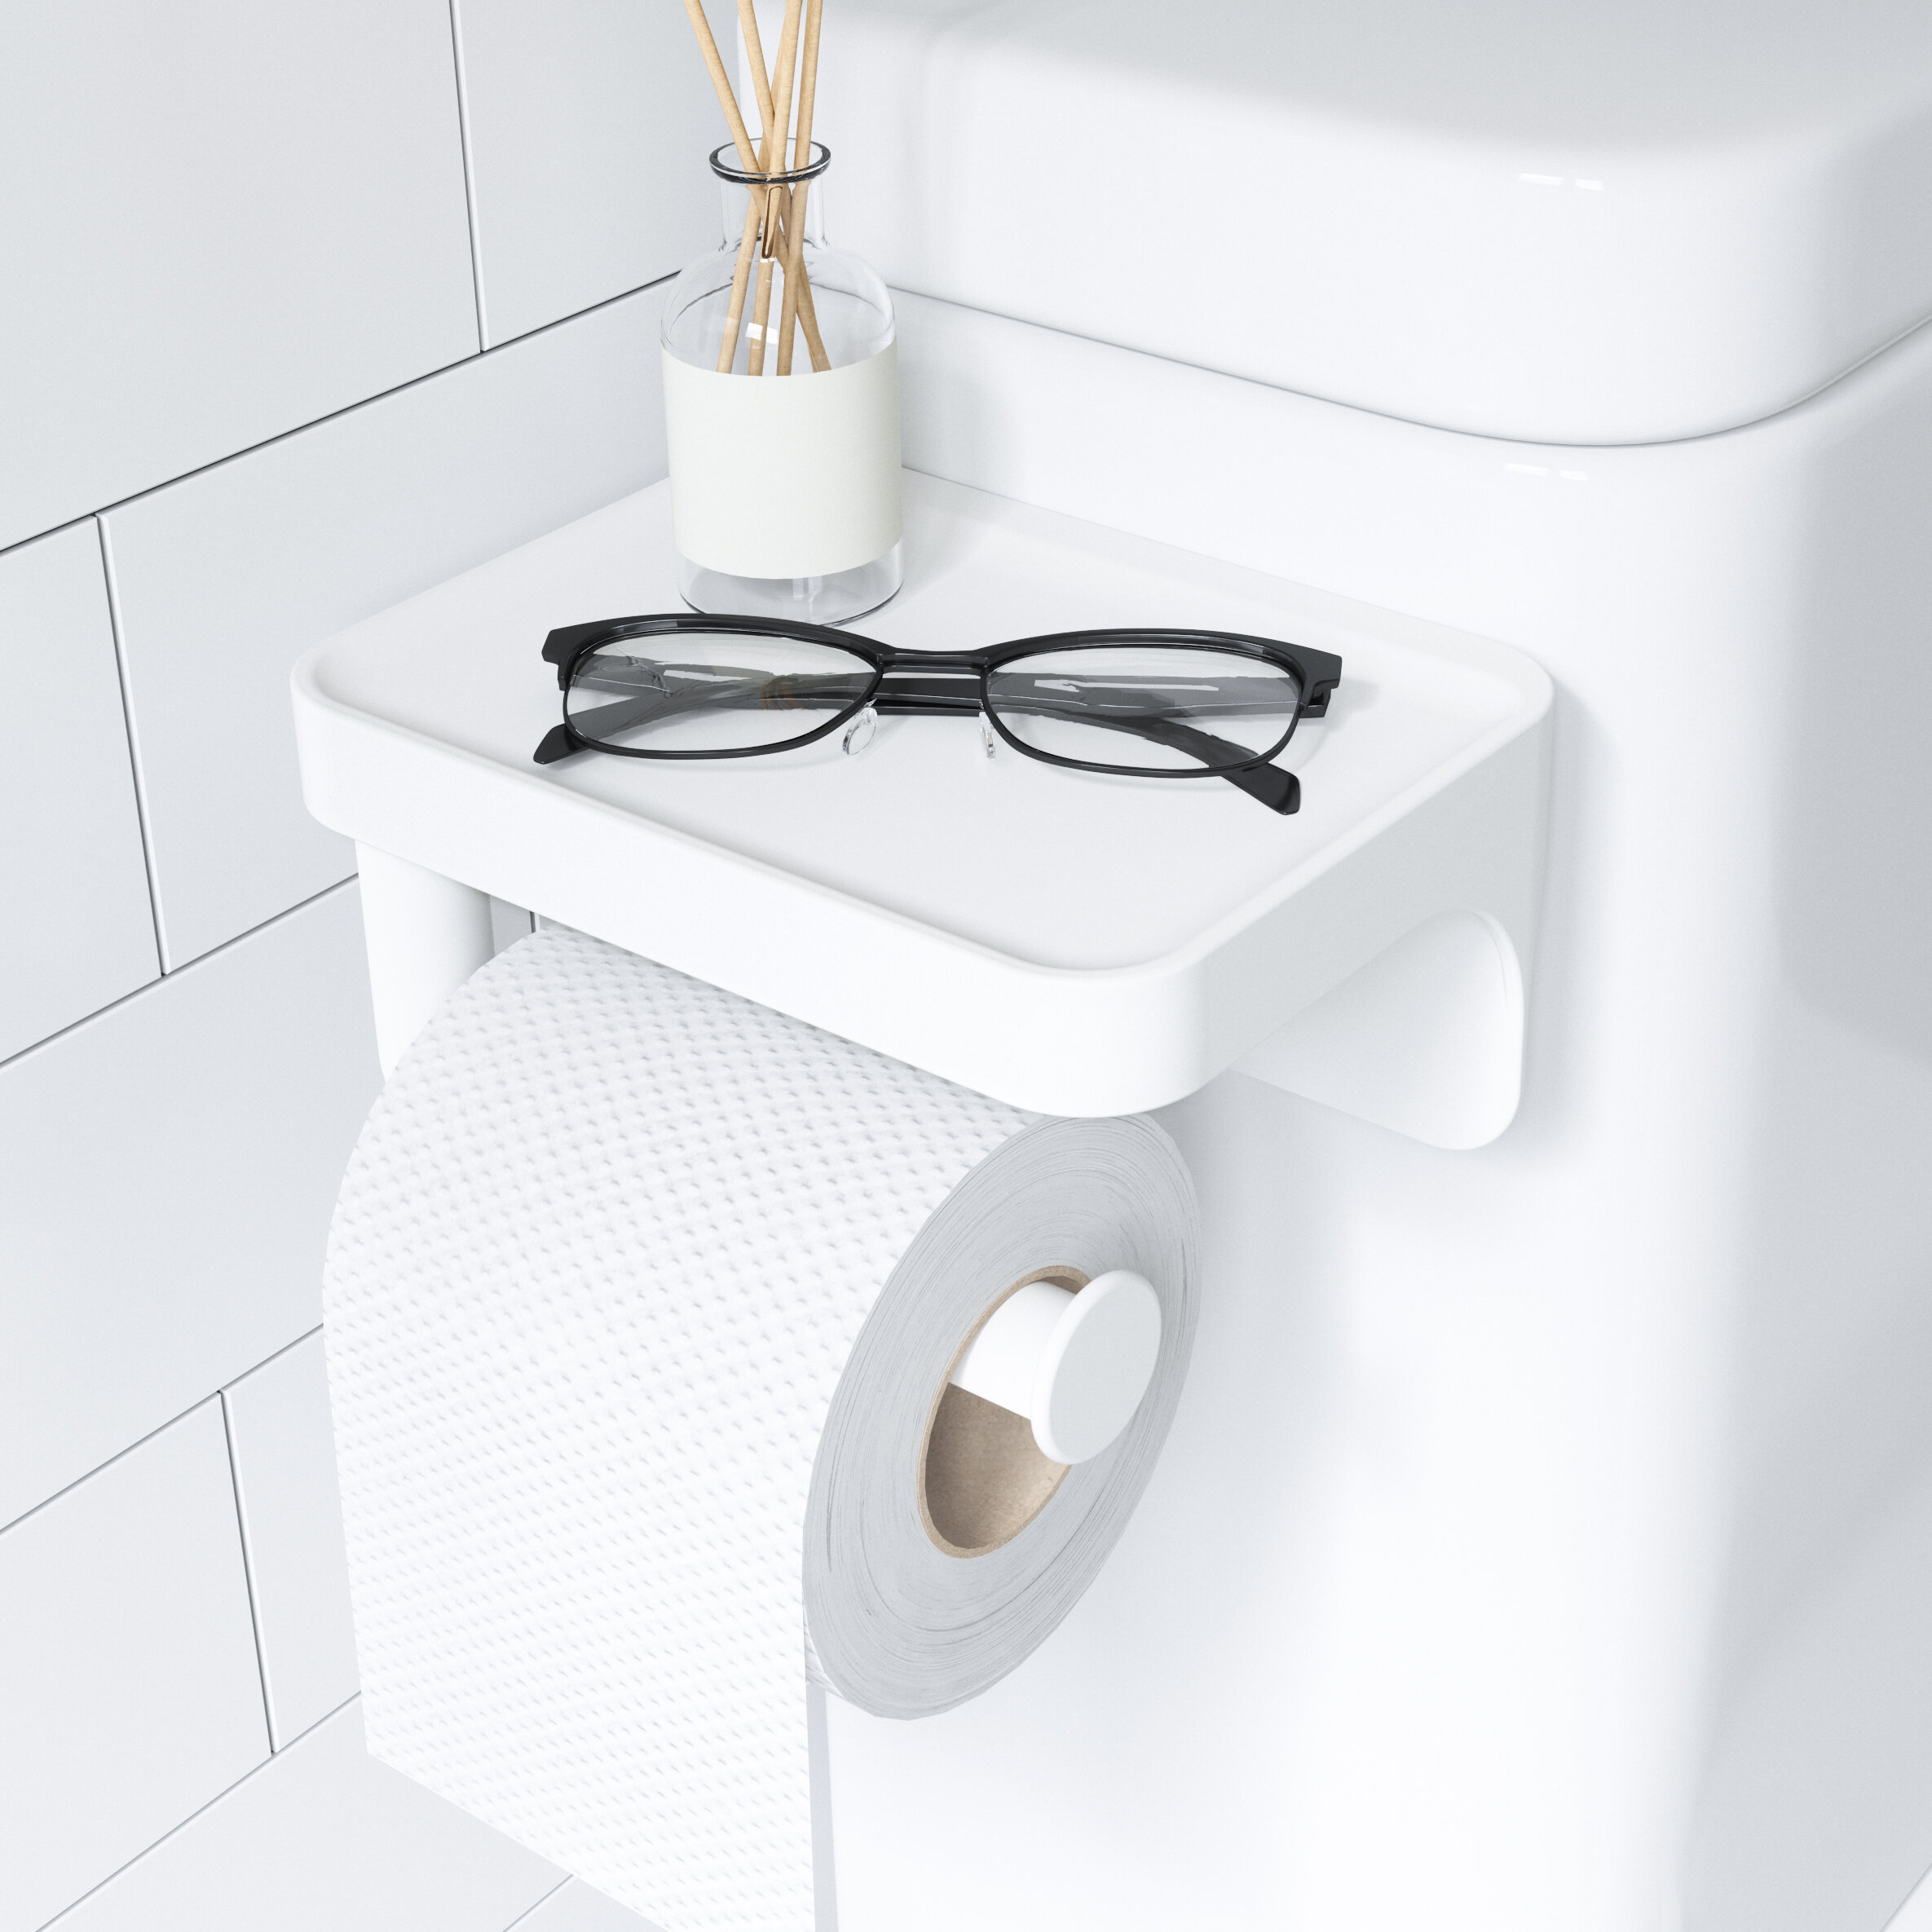 Hangs Over The Tank Convenient Single Roll Toilet Paper Tissue Holder Hanger